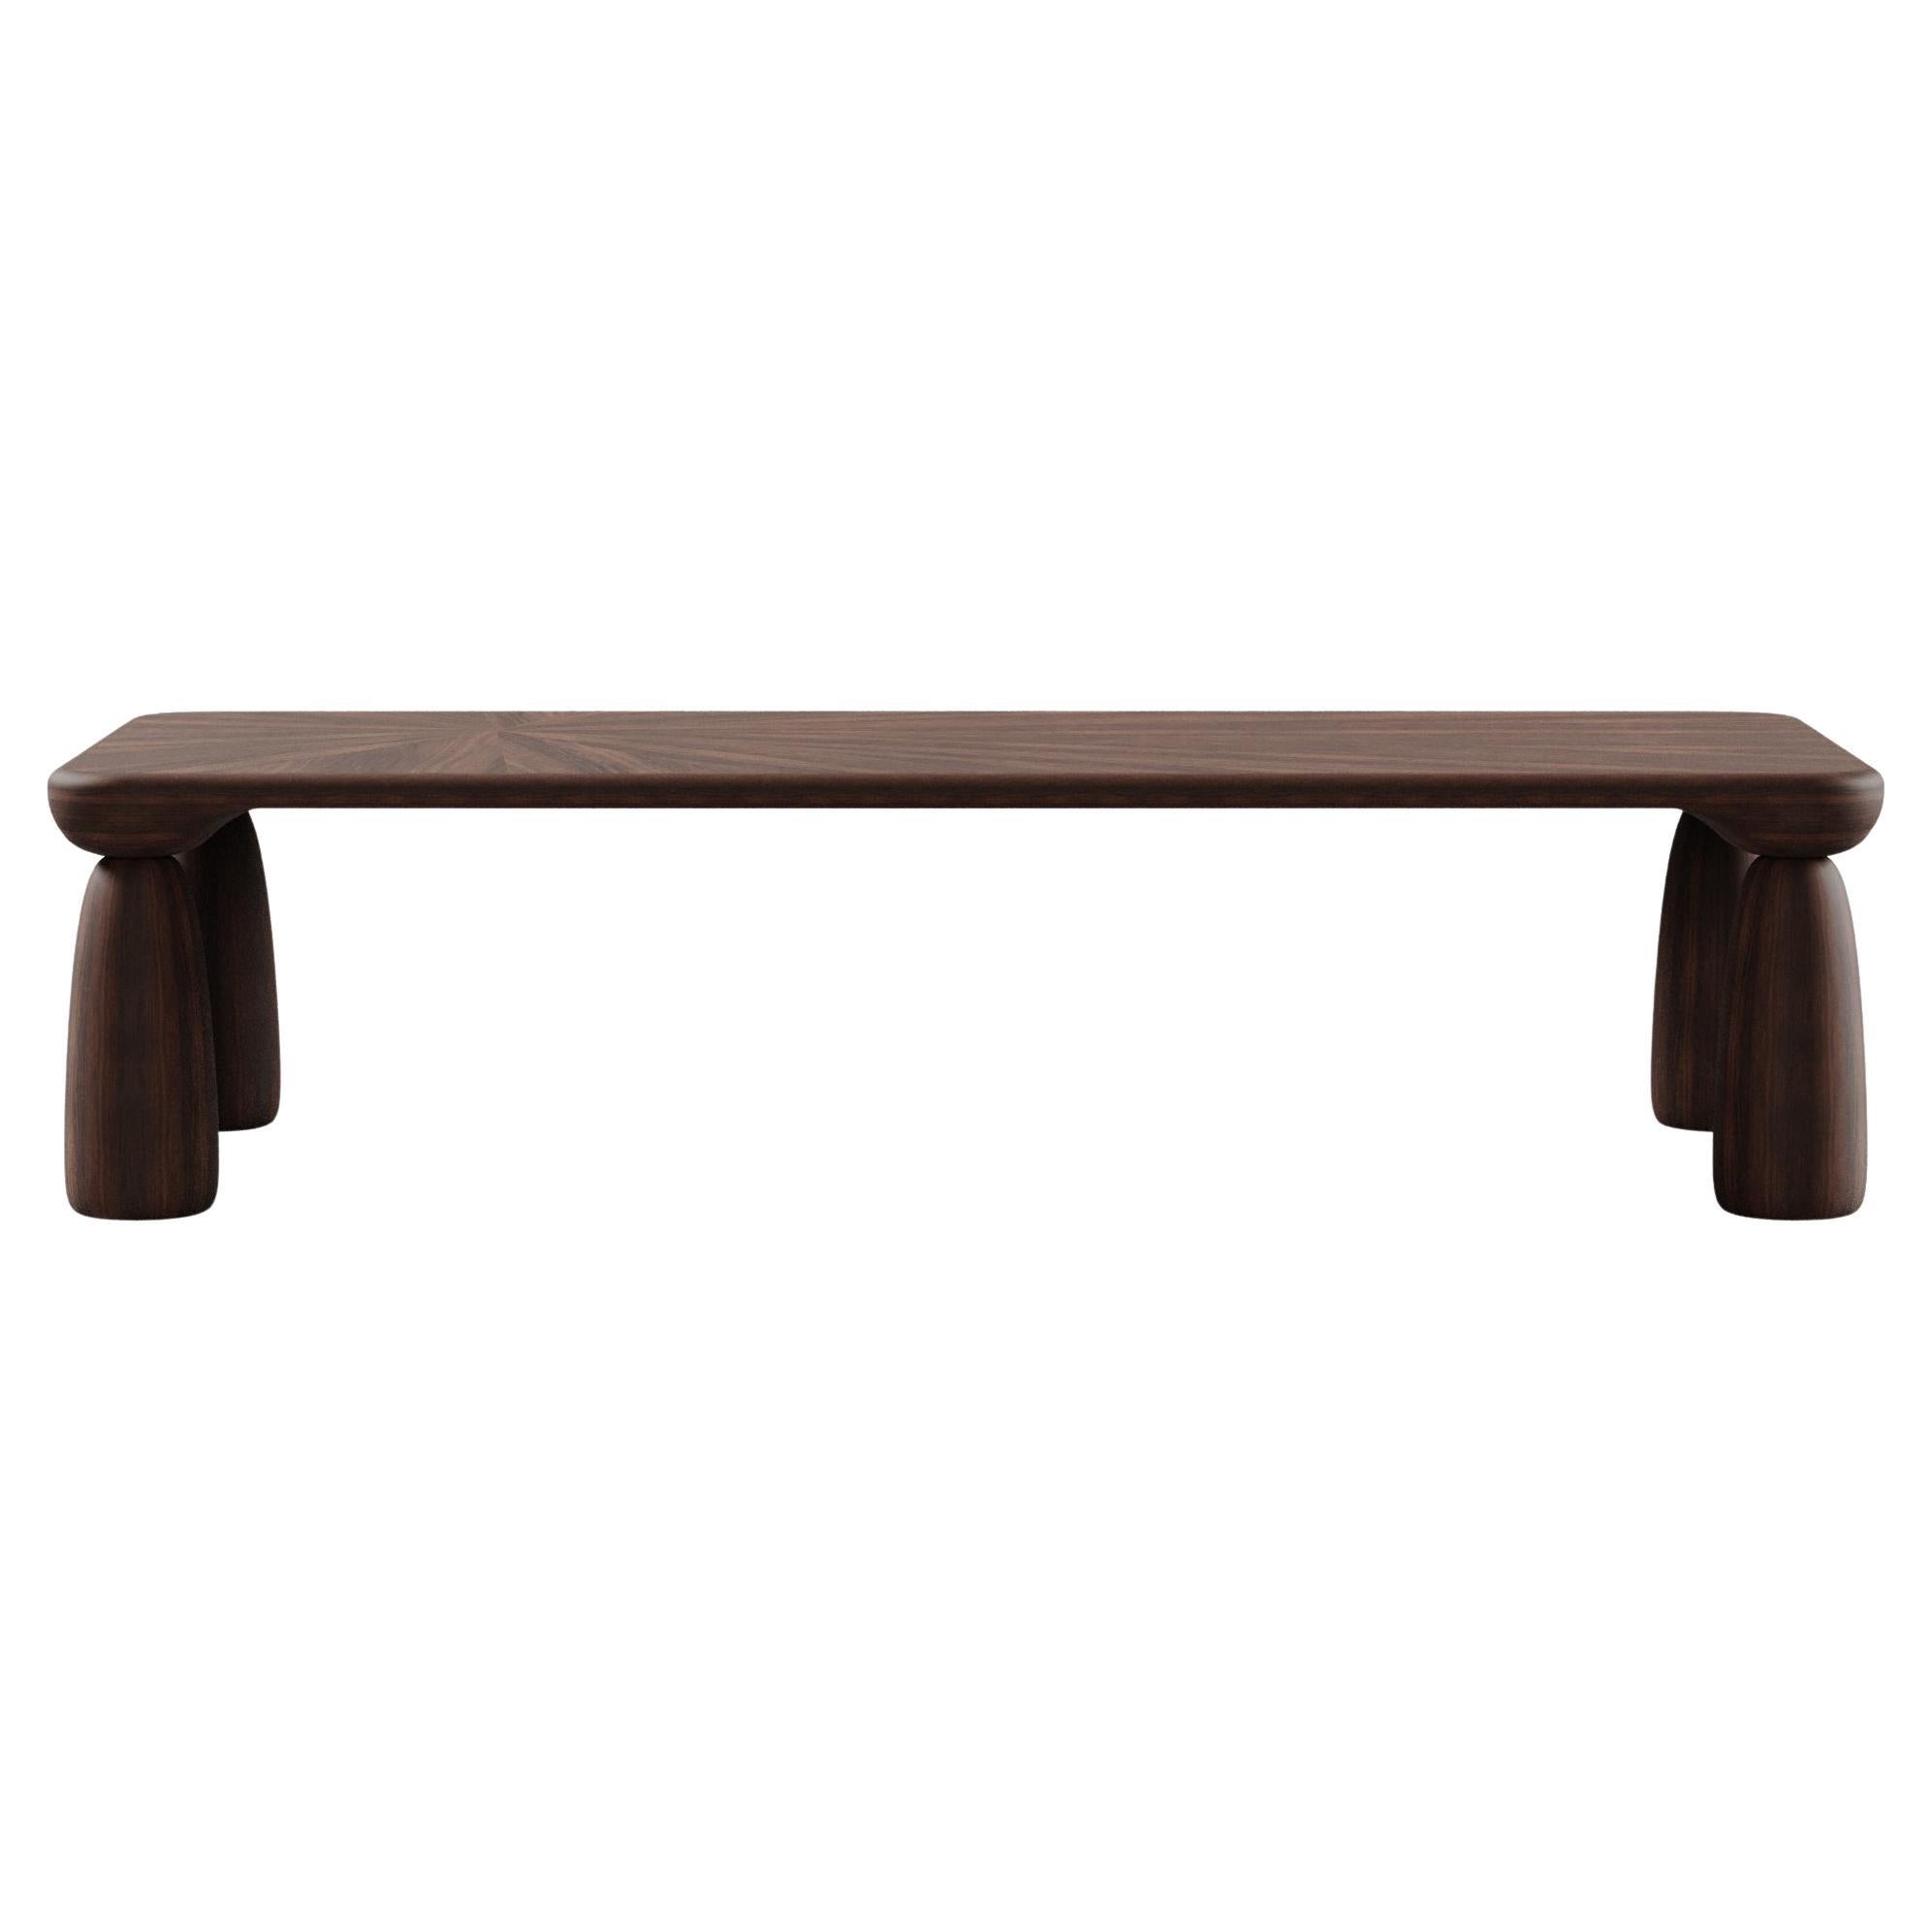 21st Century Mansfield Dining Table Walnut Wood by Wood Tailors Club For Sale